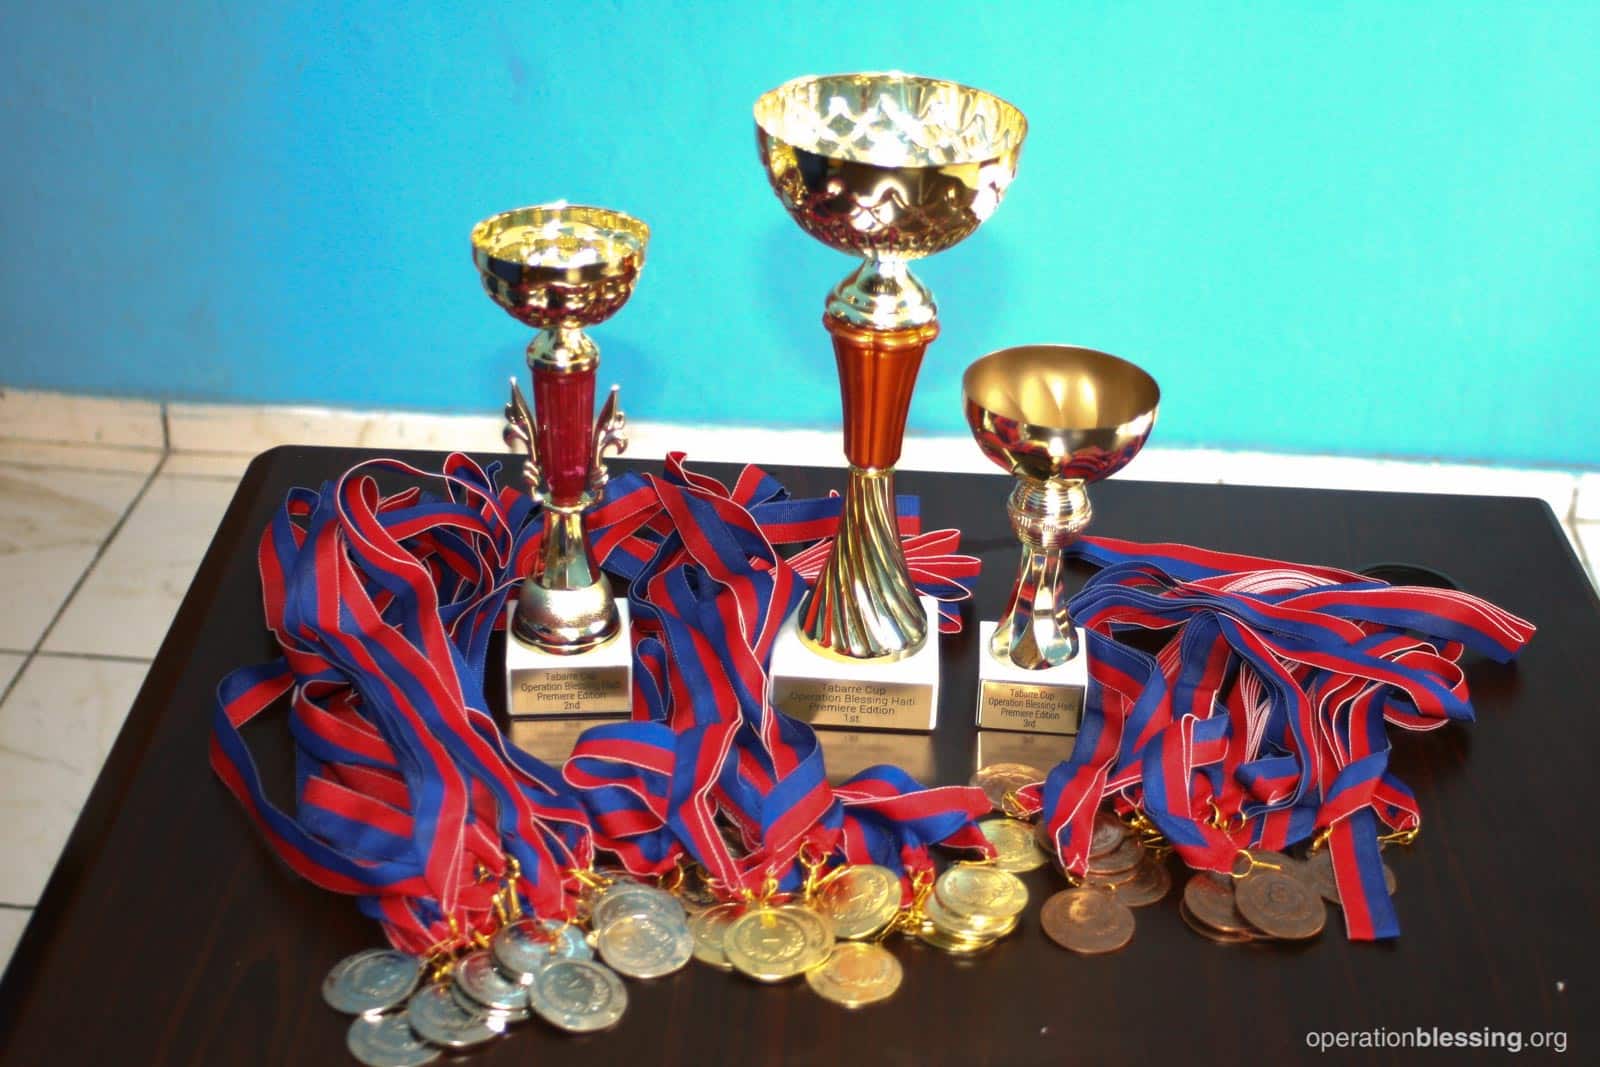 Baseball tournament trophies and medals.